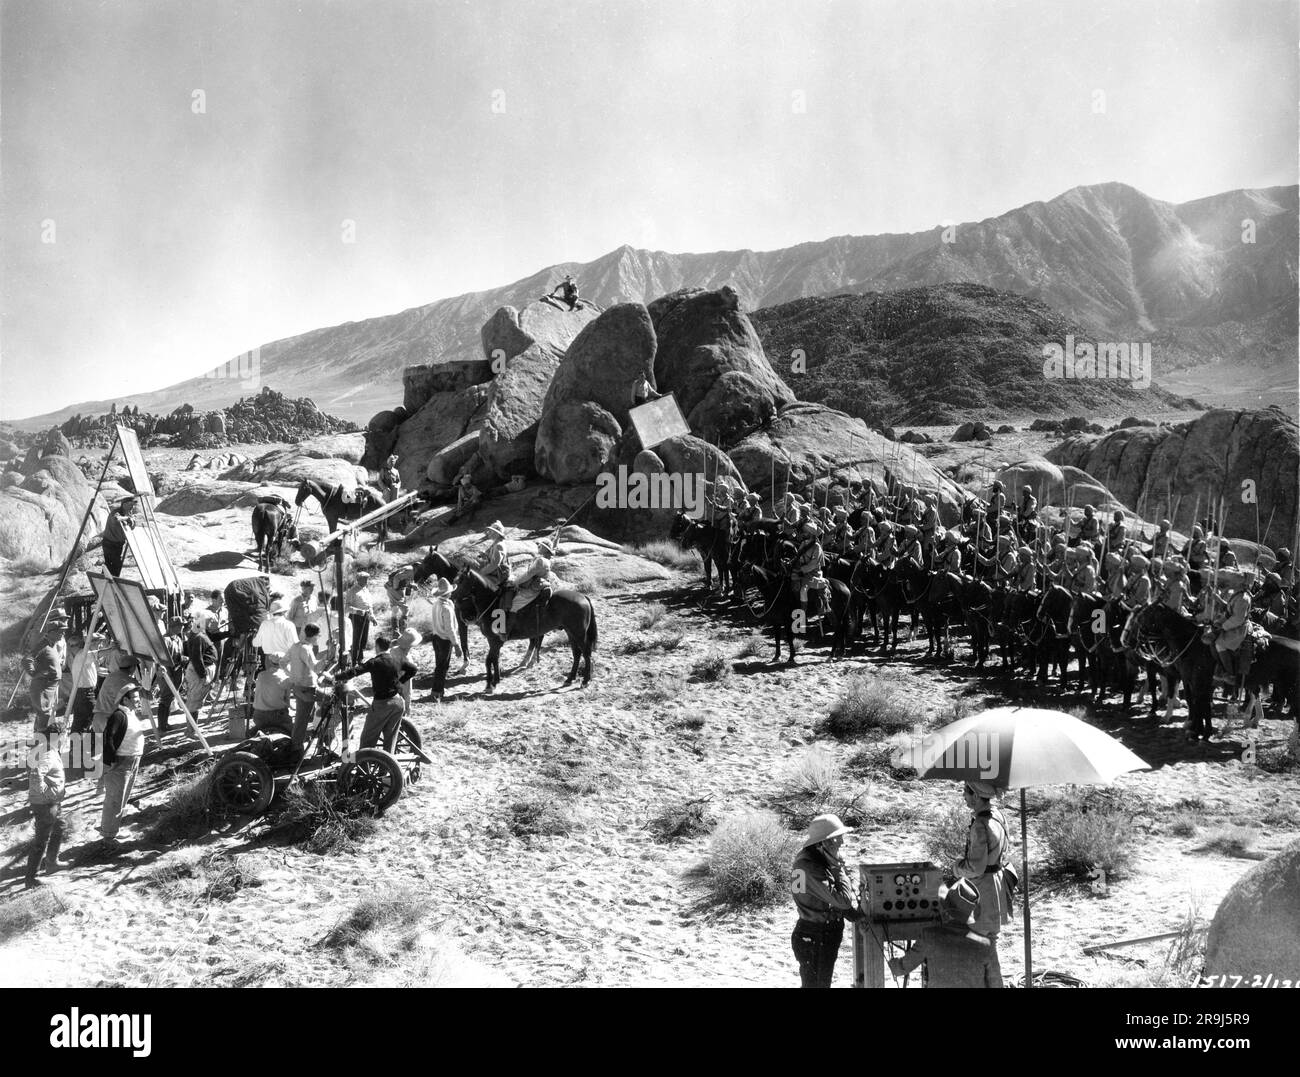 C. AUBREY SMITH and Sir GUY STANDING on set location candid with Movie Crew and Extras during filming of THE LIVES OF A BENGAL LANCER 1935 director HENRY HATHAWAY suggested by the novel by Francis Yeats Brown Paramount Pictures Stock Photo